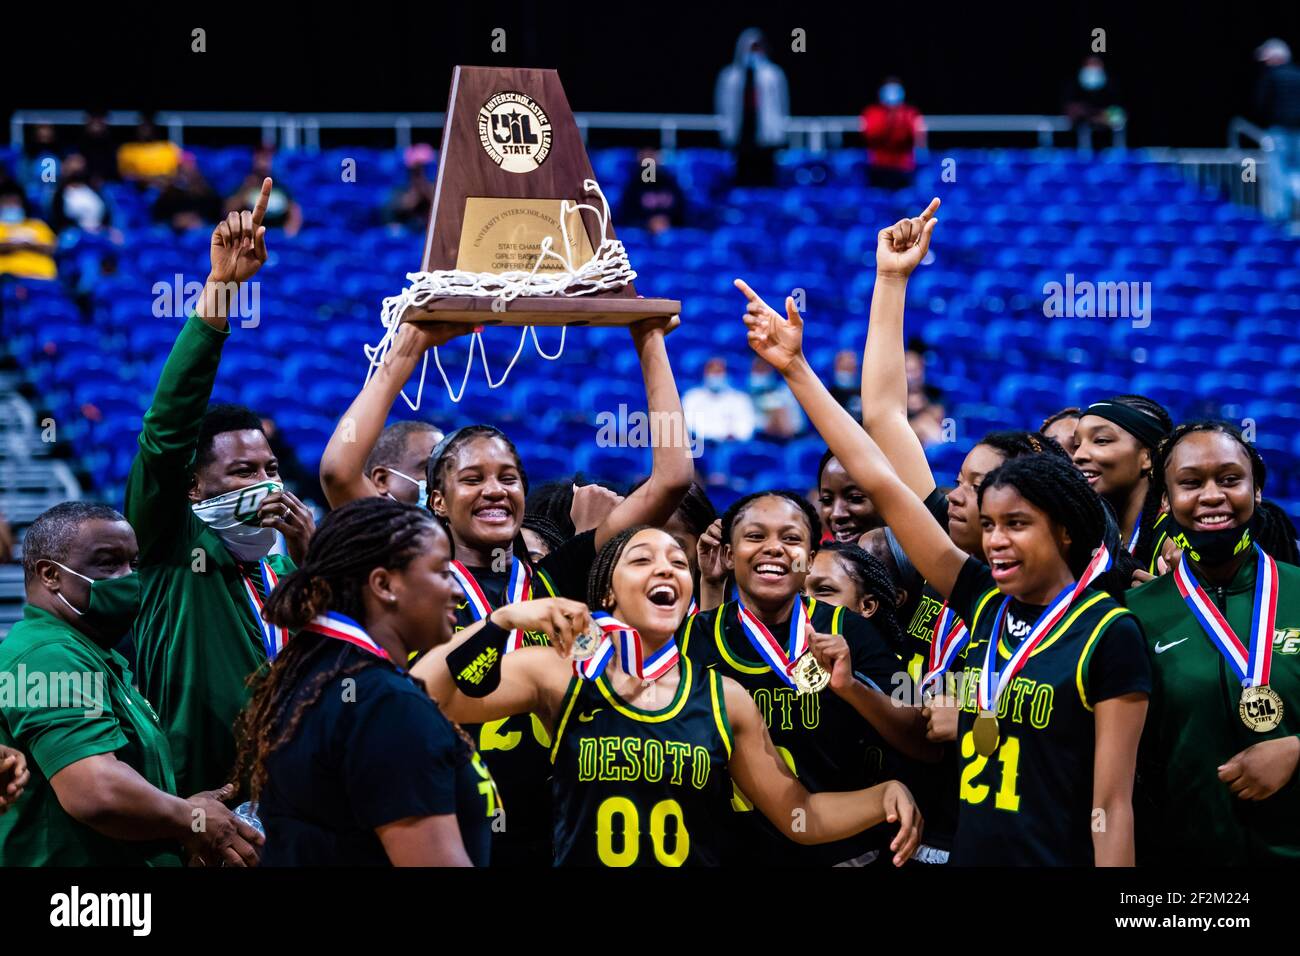 San Antonio, Texas, USA. 11th Mar, 2021. DeSoto celebrates winning the UIL Texas class 6A state title, their 1st, after beating Cypress Creek 53-37 at the Alamodome in San Antonio Texas, on March 11, 2021. Credit: Matthew Smith/ZUMA Wire/Alamy Live News Stock Photo